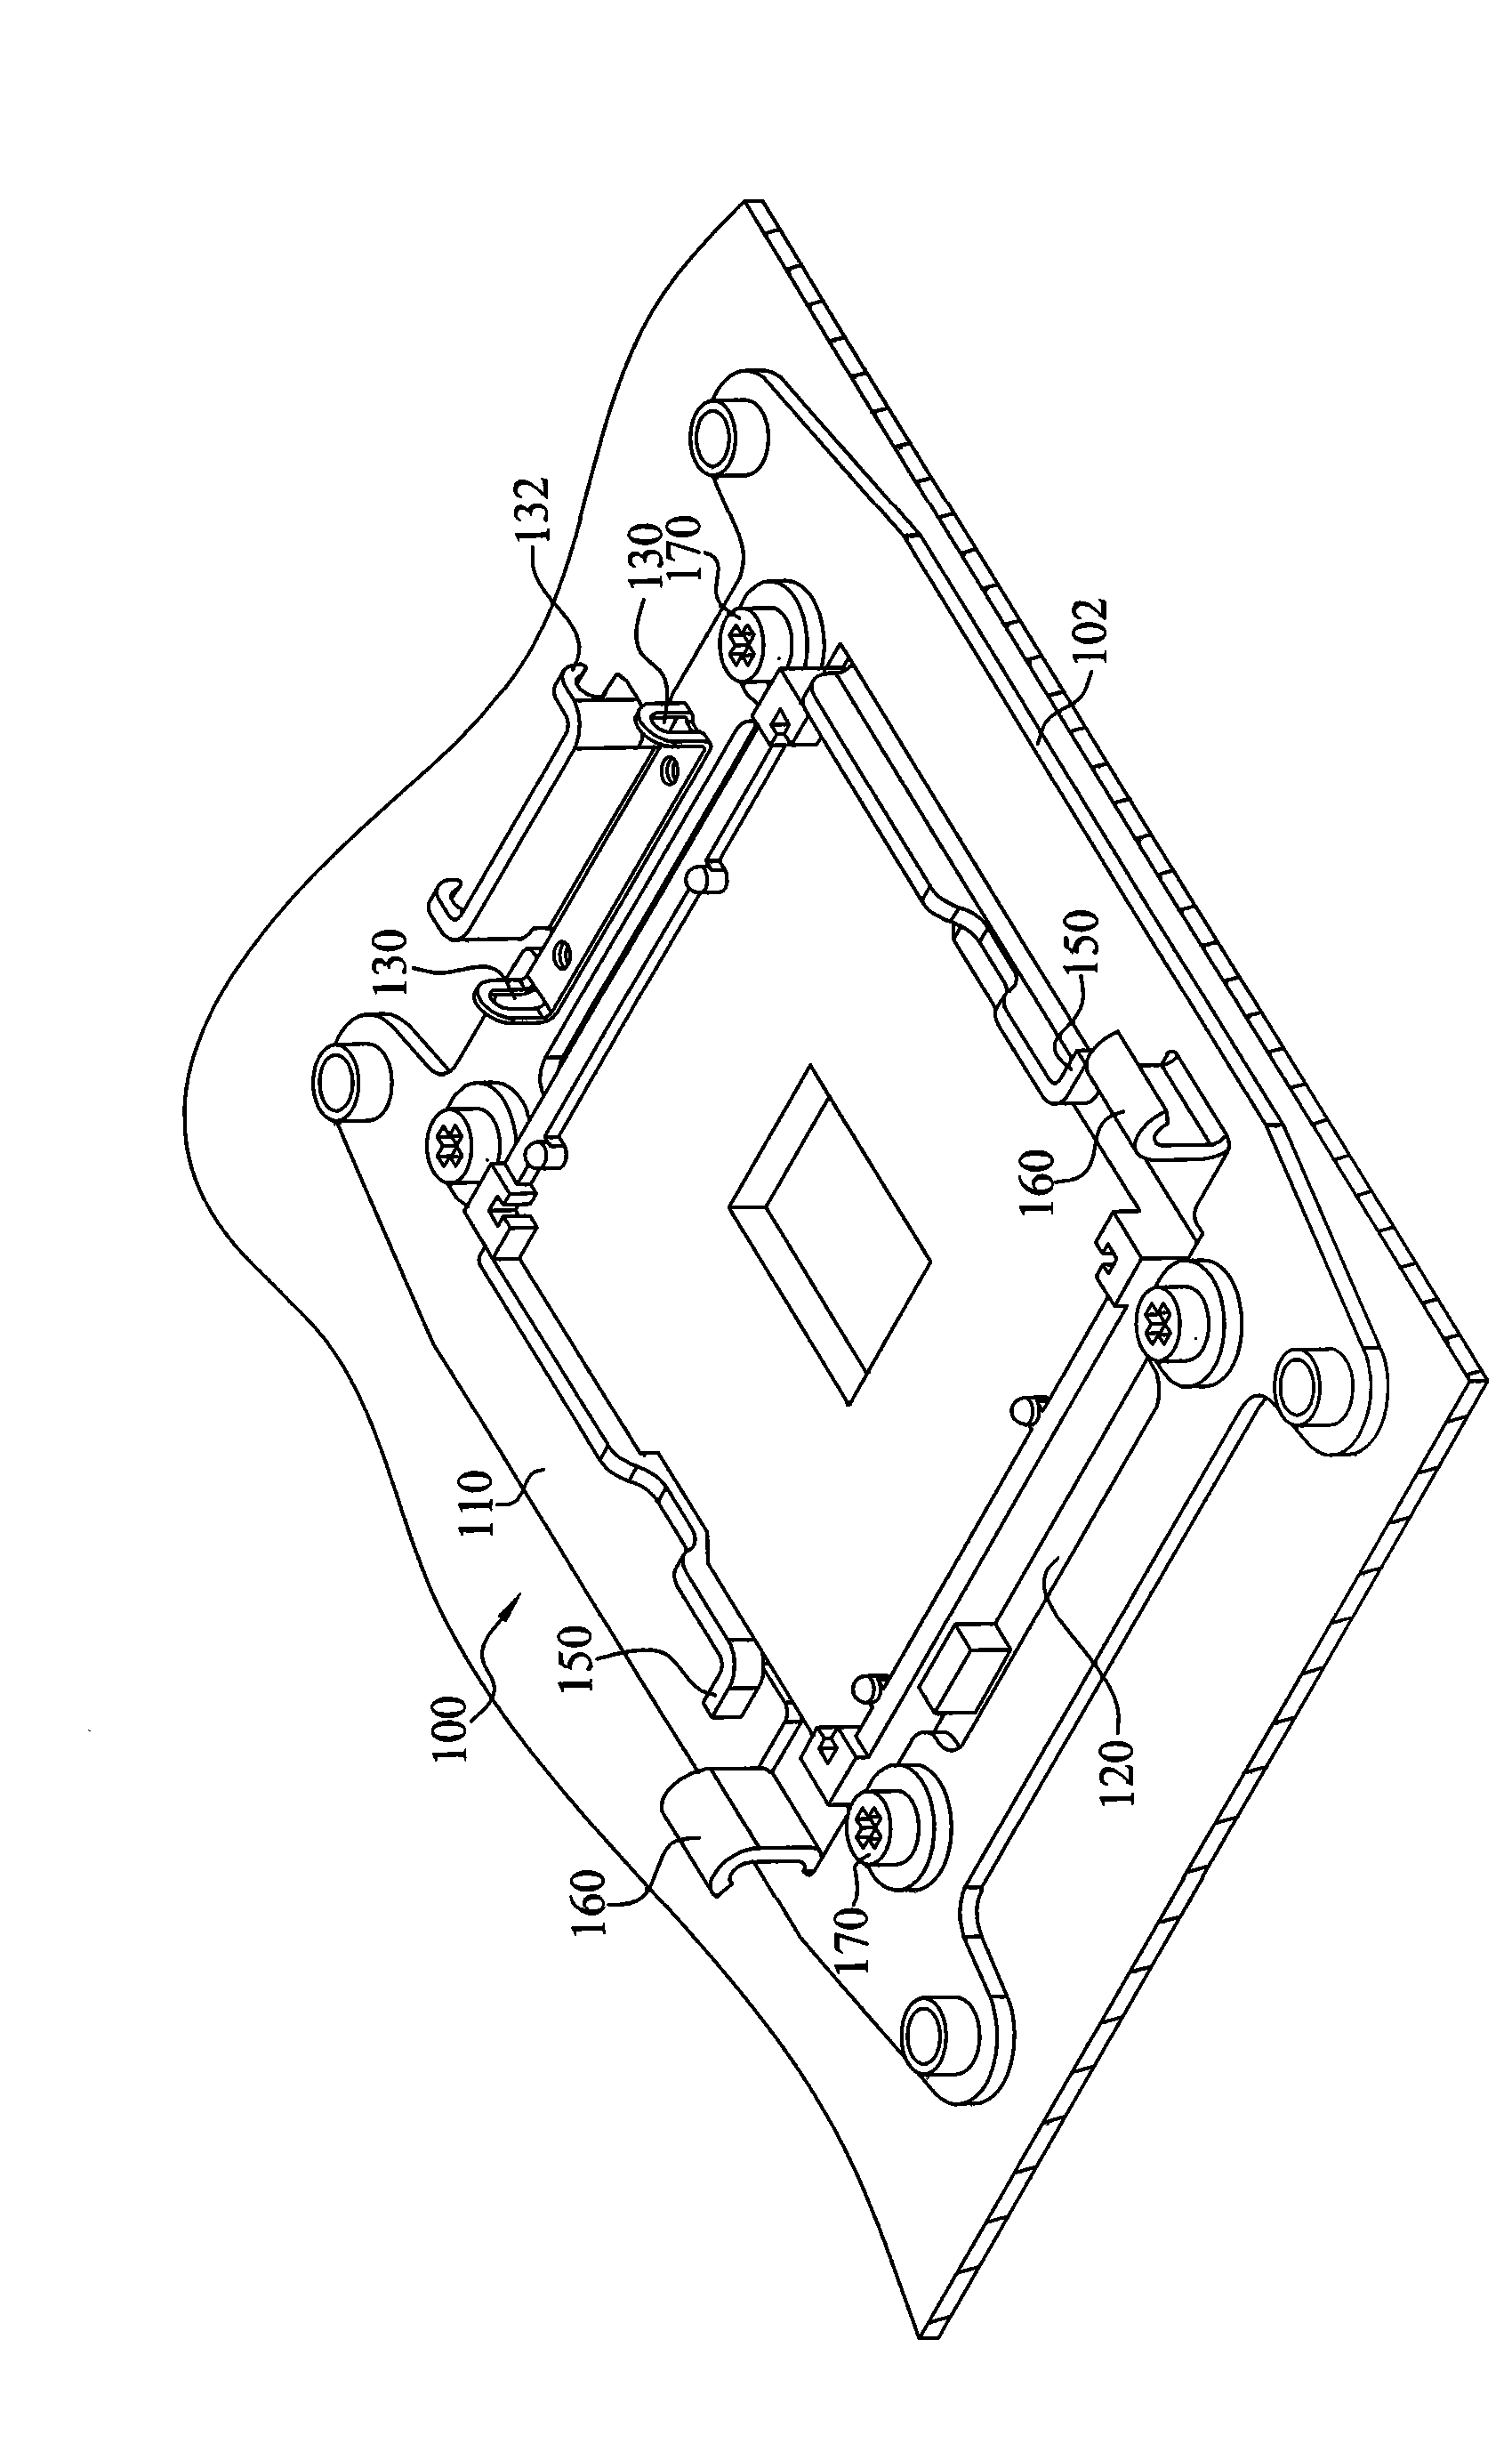 Fixing device of central processing unit and method using fixing device